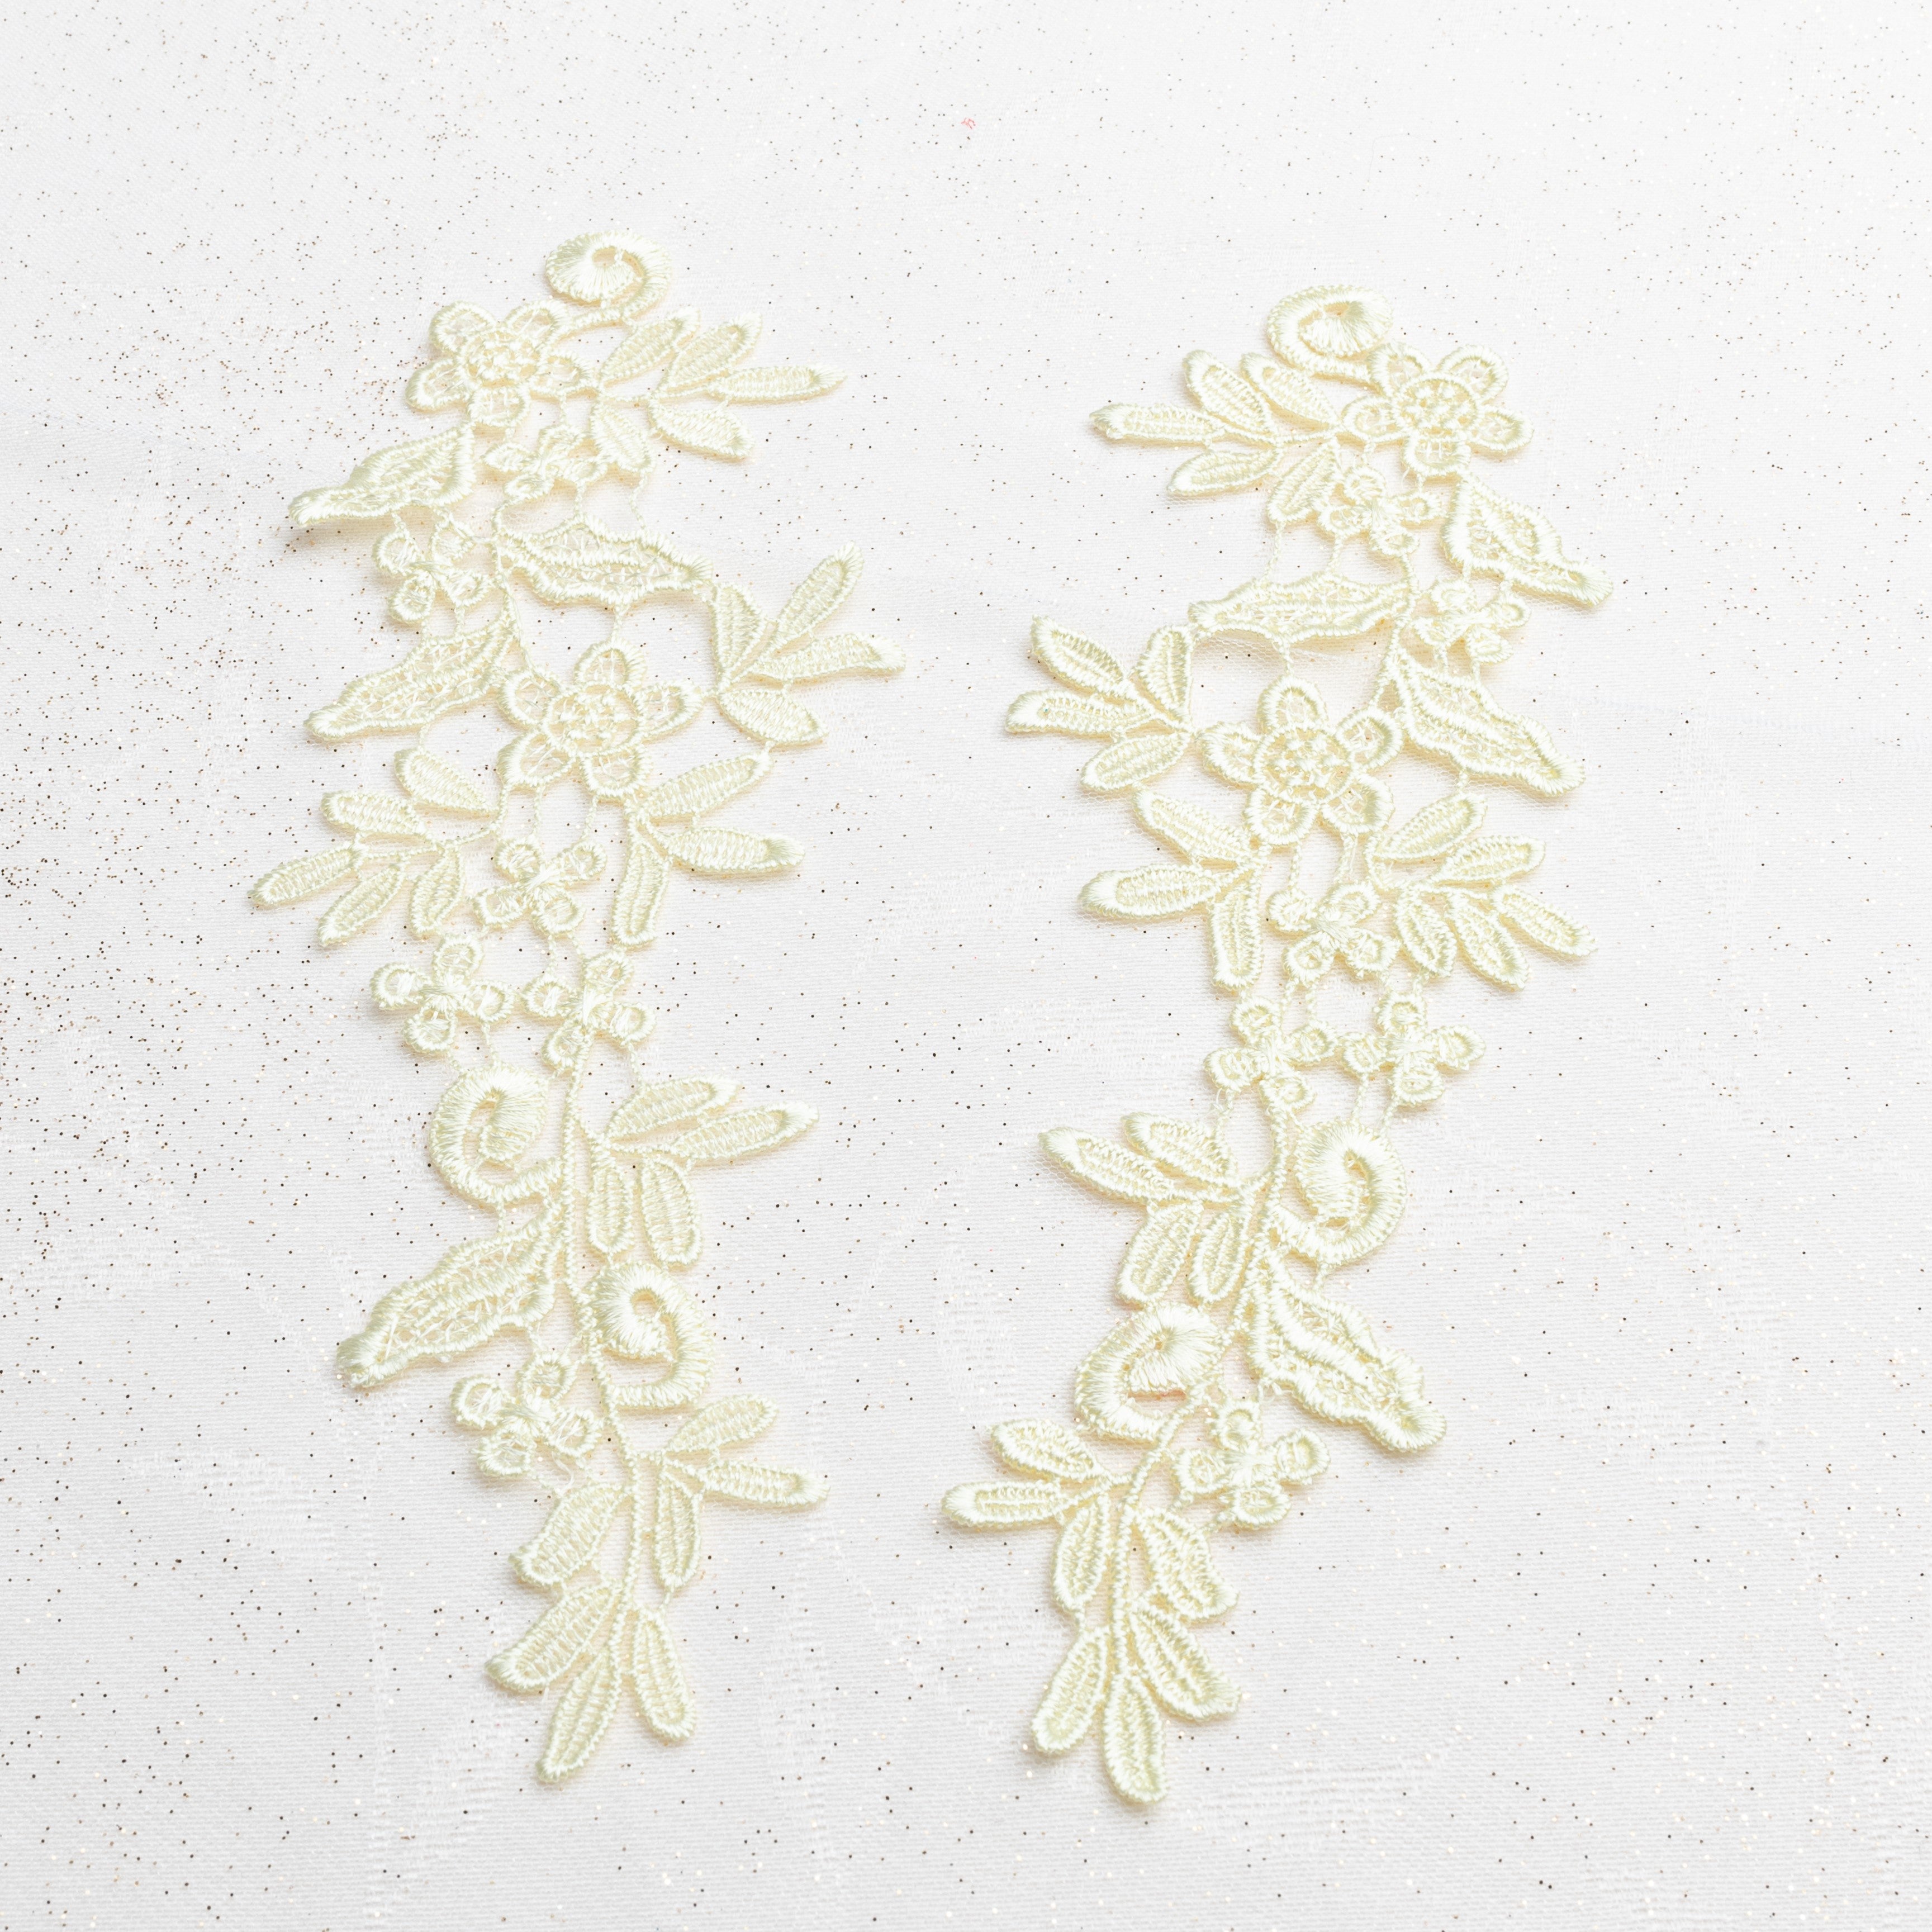 Heavily embroidered lemon yellow lace applique pair with a floral design laying flat on a white background.